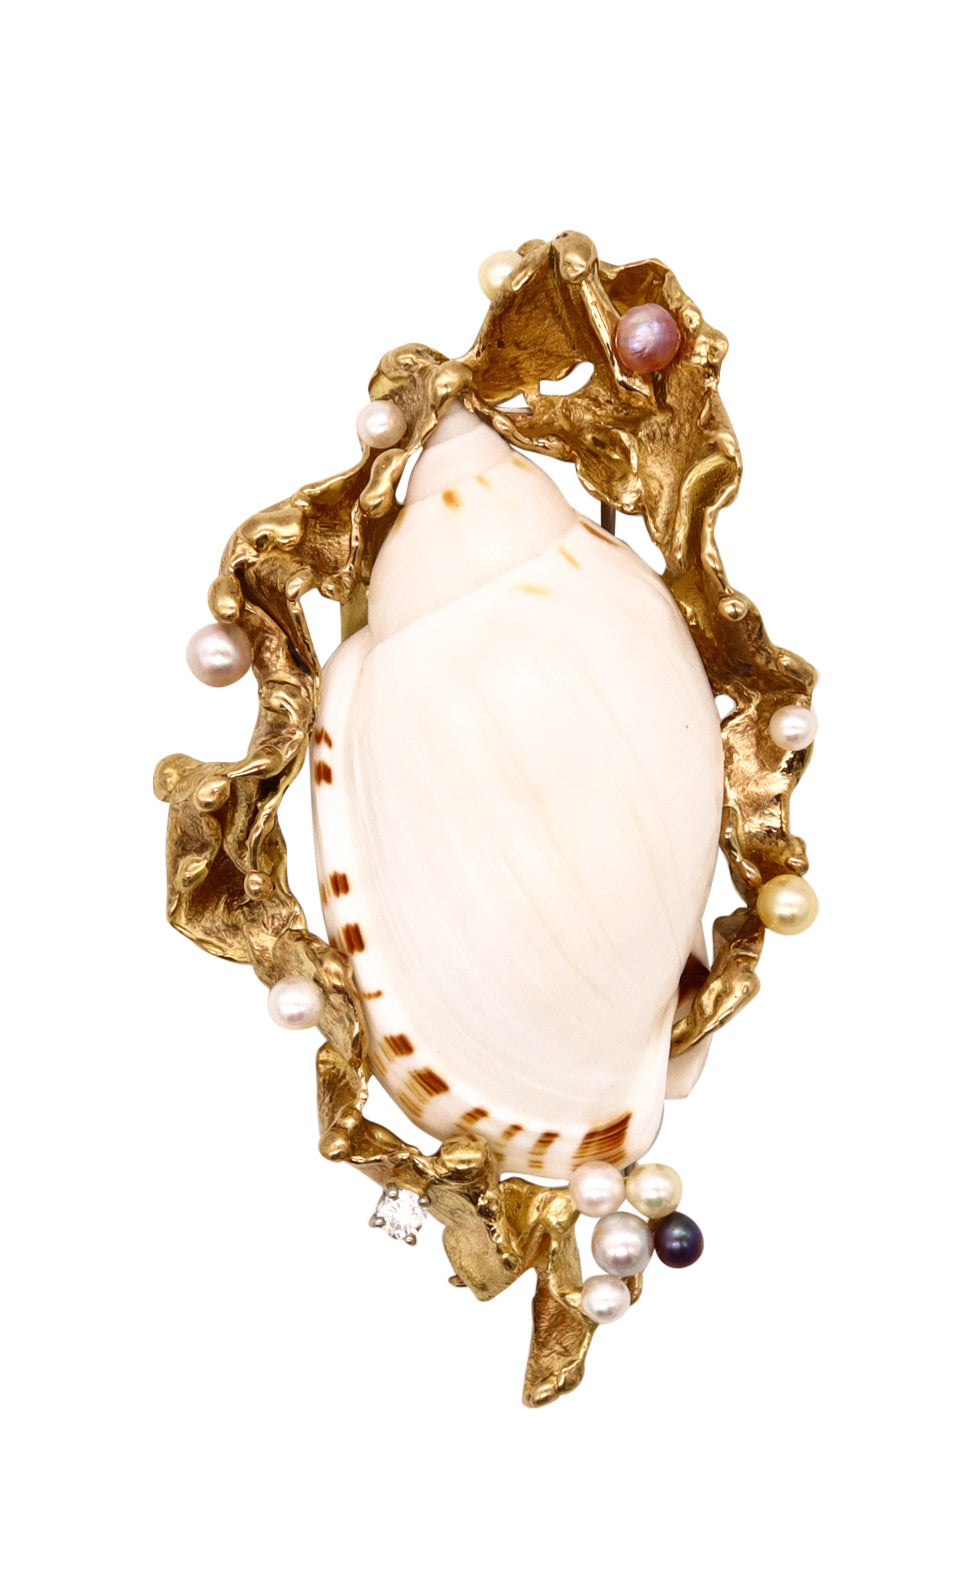 Gilbert Albert 1970 Swiss Modernist Pendant Brooch In 18Kt Yellow Gold With Shell And 12 Natural Pearls